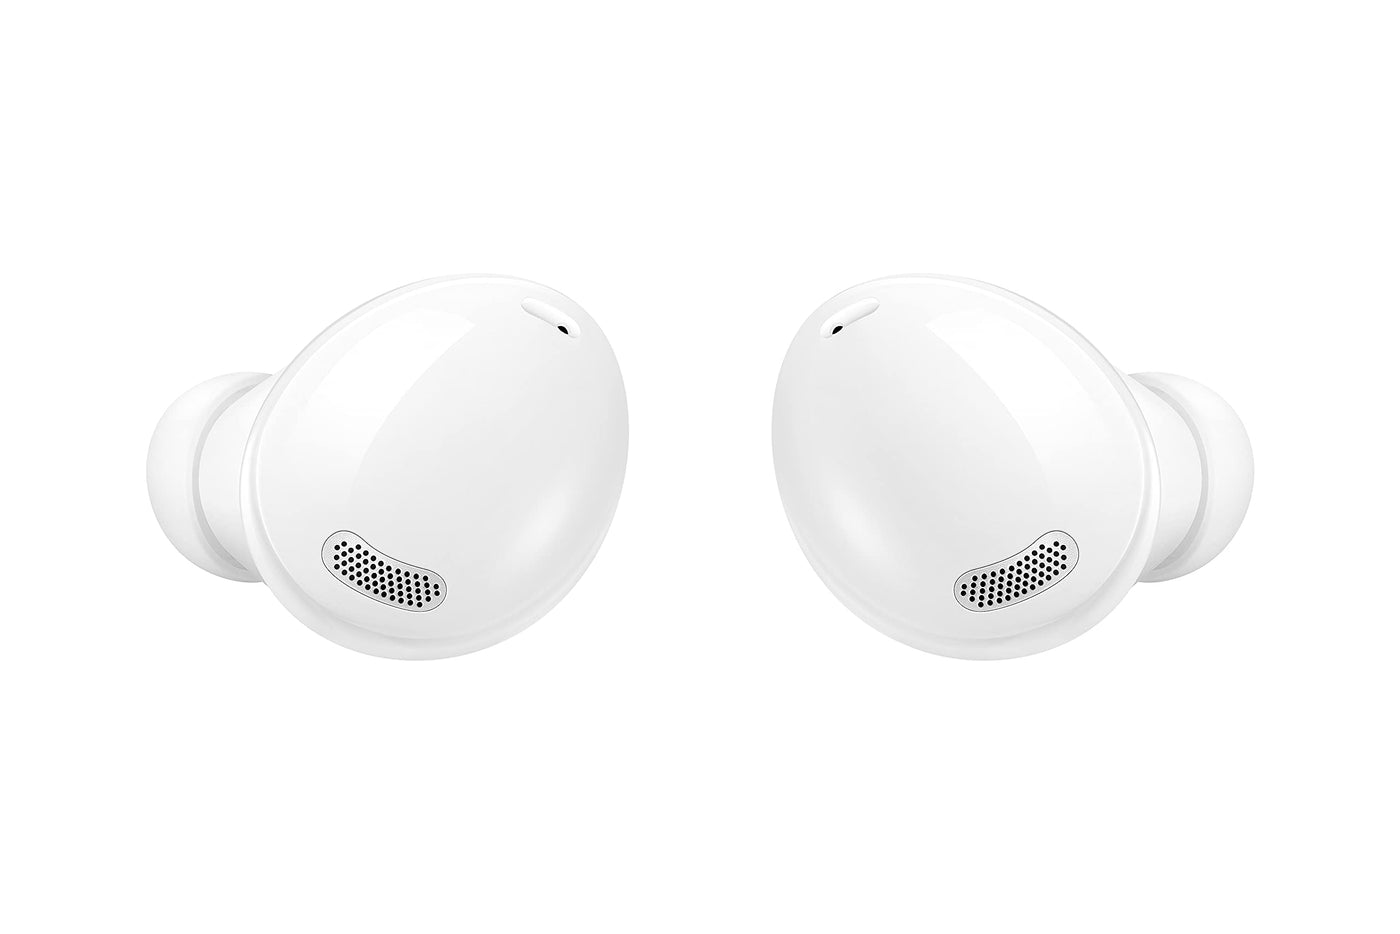 SAMSUNG Galaxy Buds Pro True Wireless Bluetooth Earbuds w/ Noise Cancelling ,US Version - Smart Tech Shopping